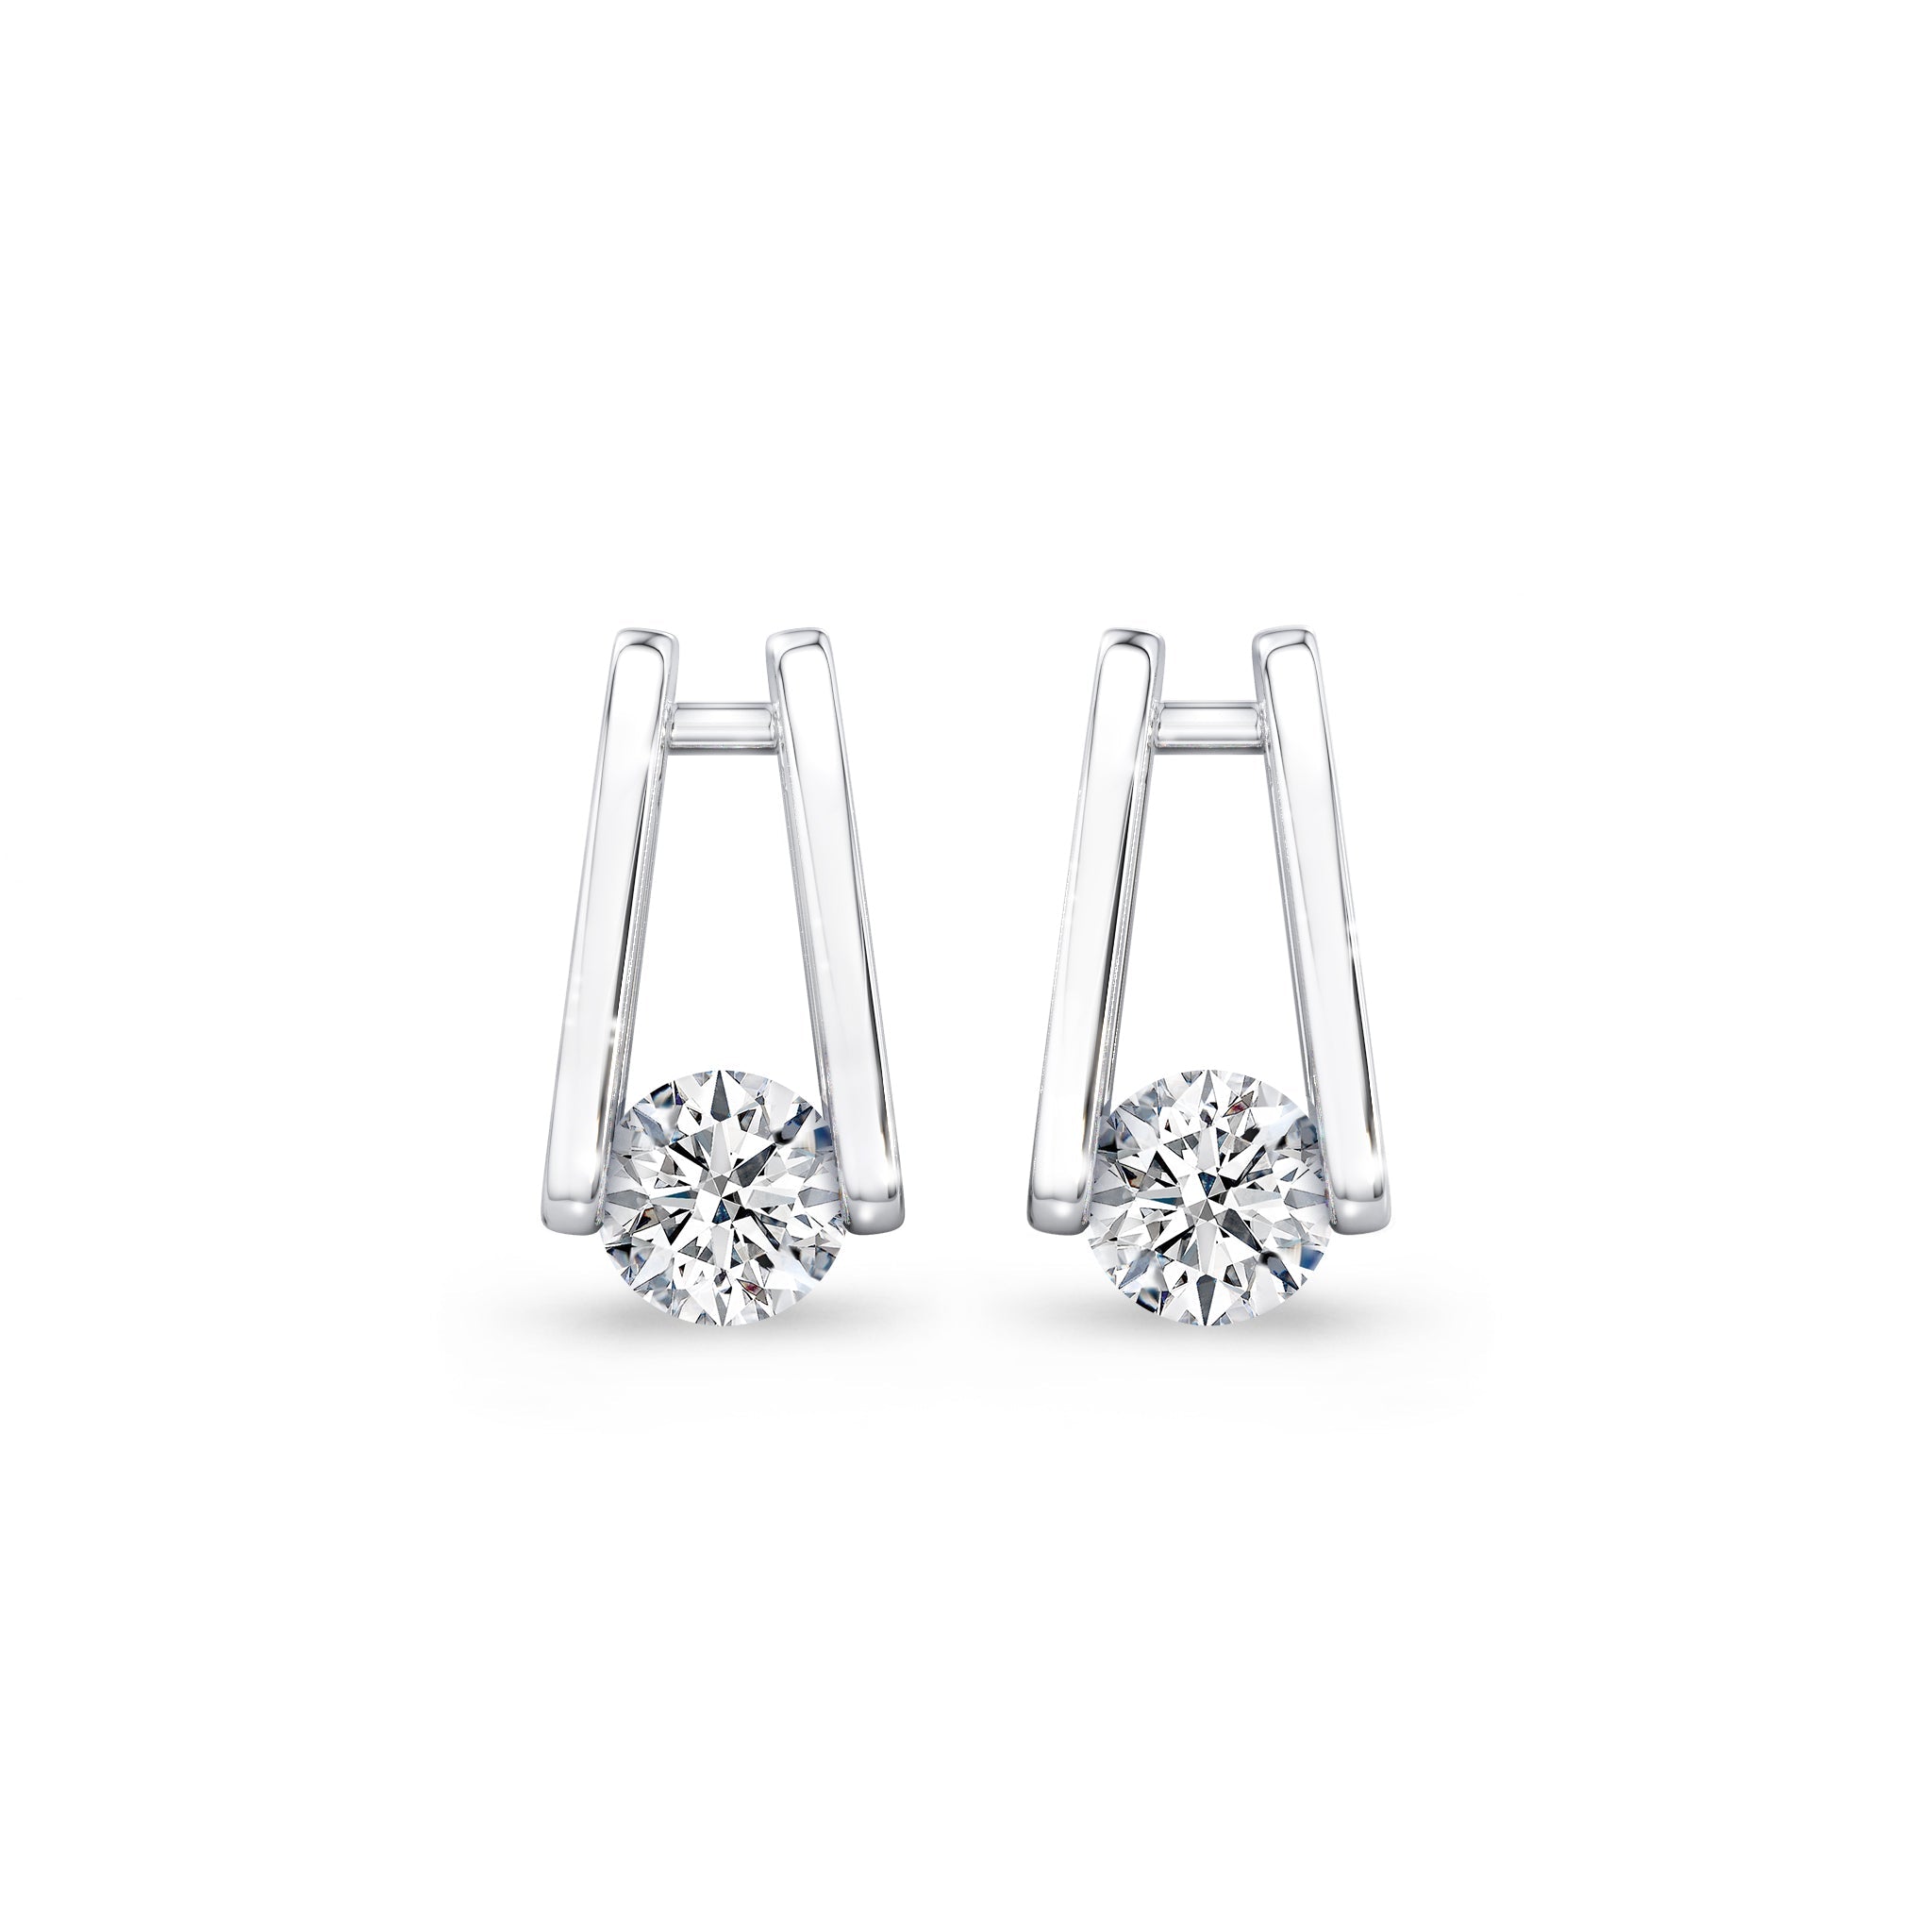 Millennium Classic Diamond Stud Earrings 1.00 Carat in 18K White Gold Front View